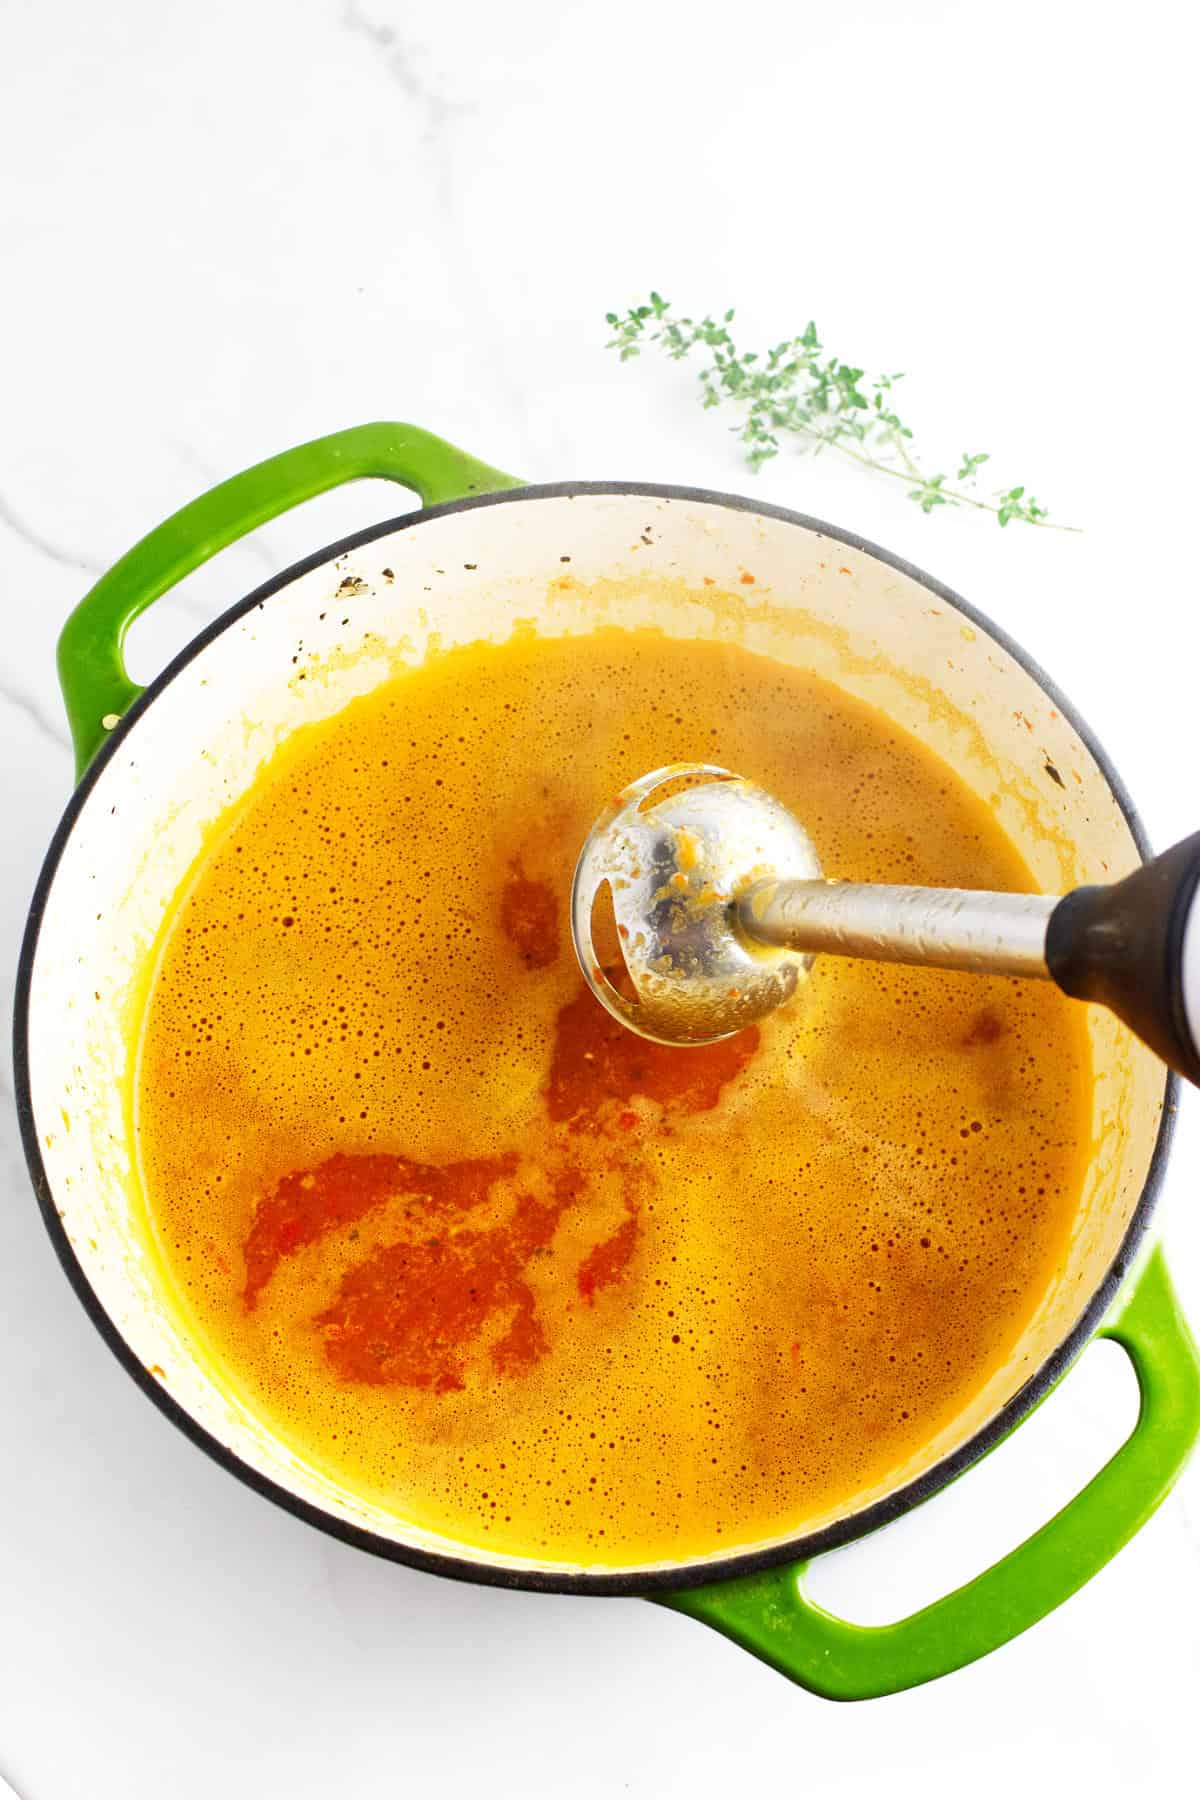 Immersion blender to puree the red pepper soup.